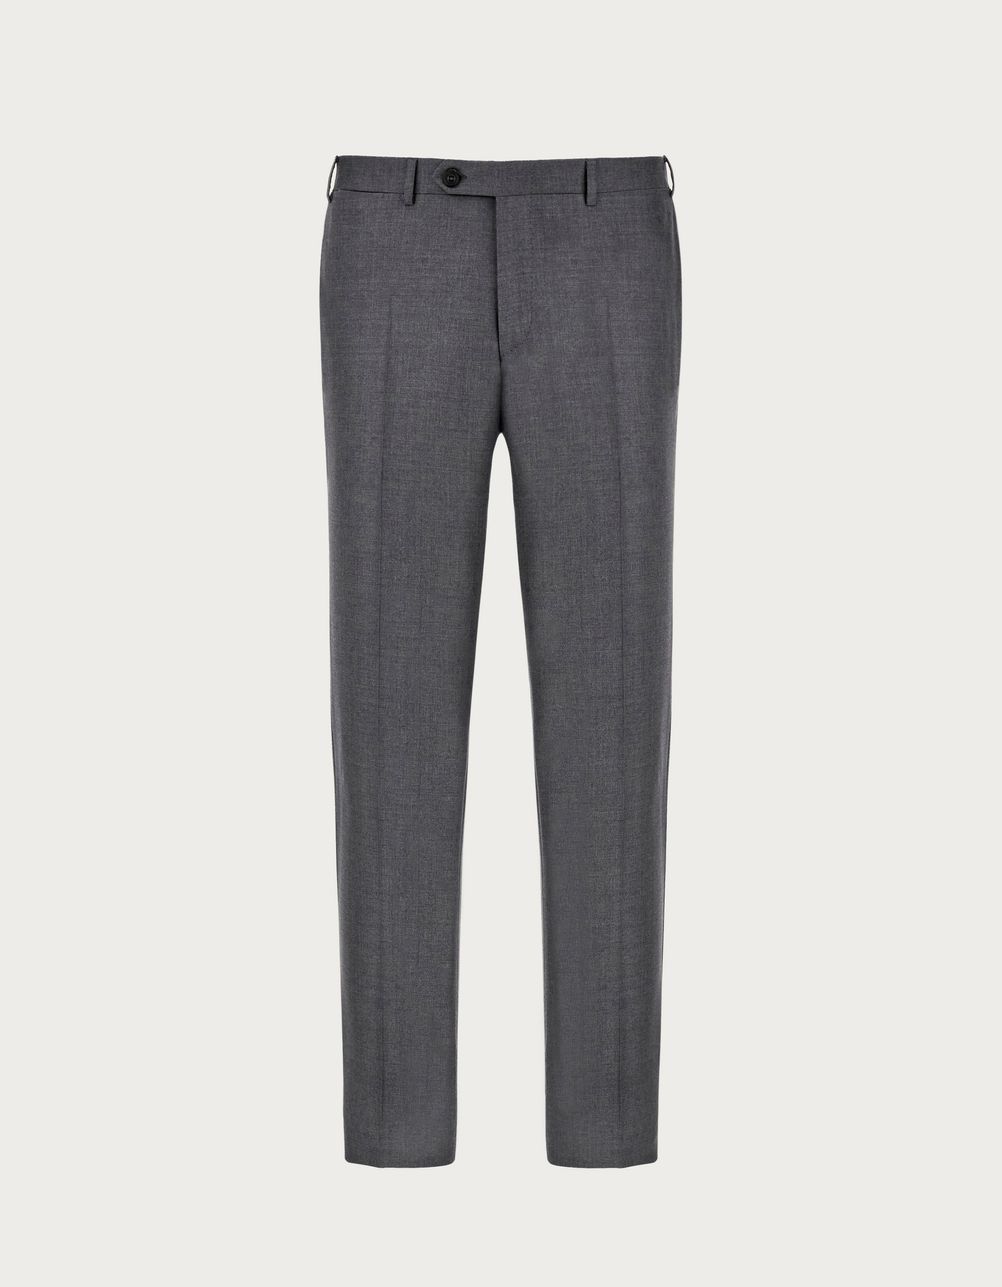 Grey trousers in 150's wool - Exclusive